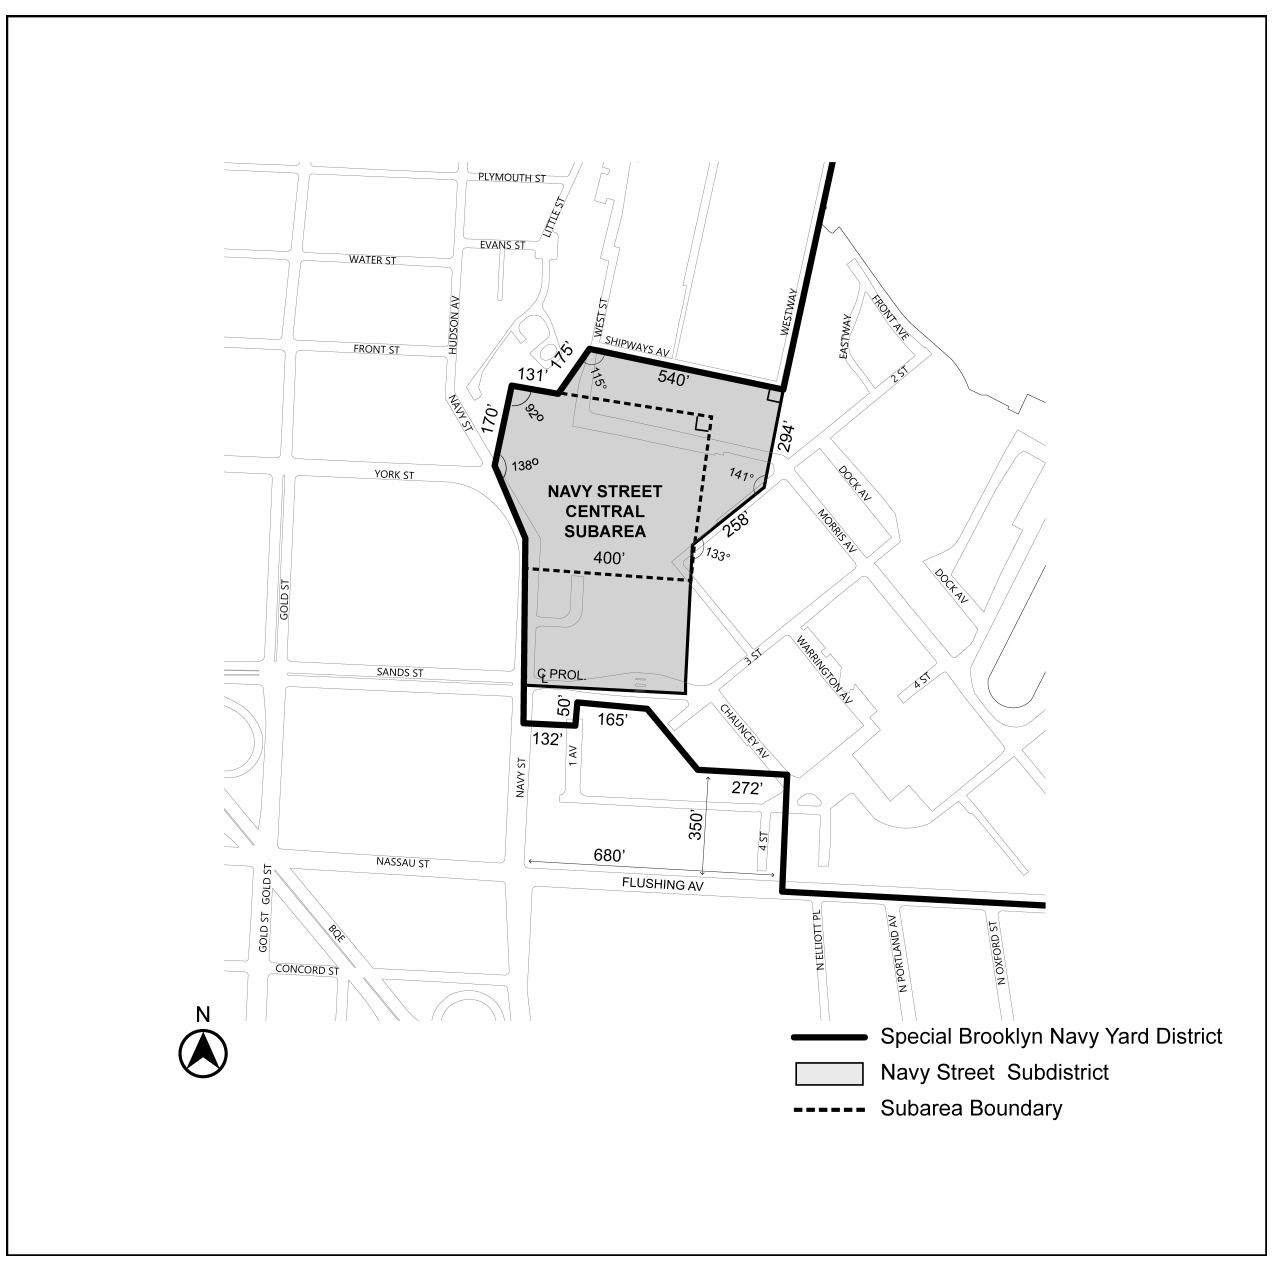 Zoning Resolutions Chapter 4: Special Brooklyn Navy Yard District APPENDIX A.2